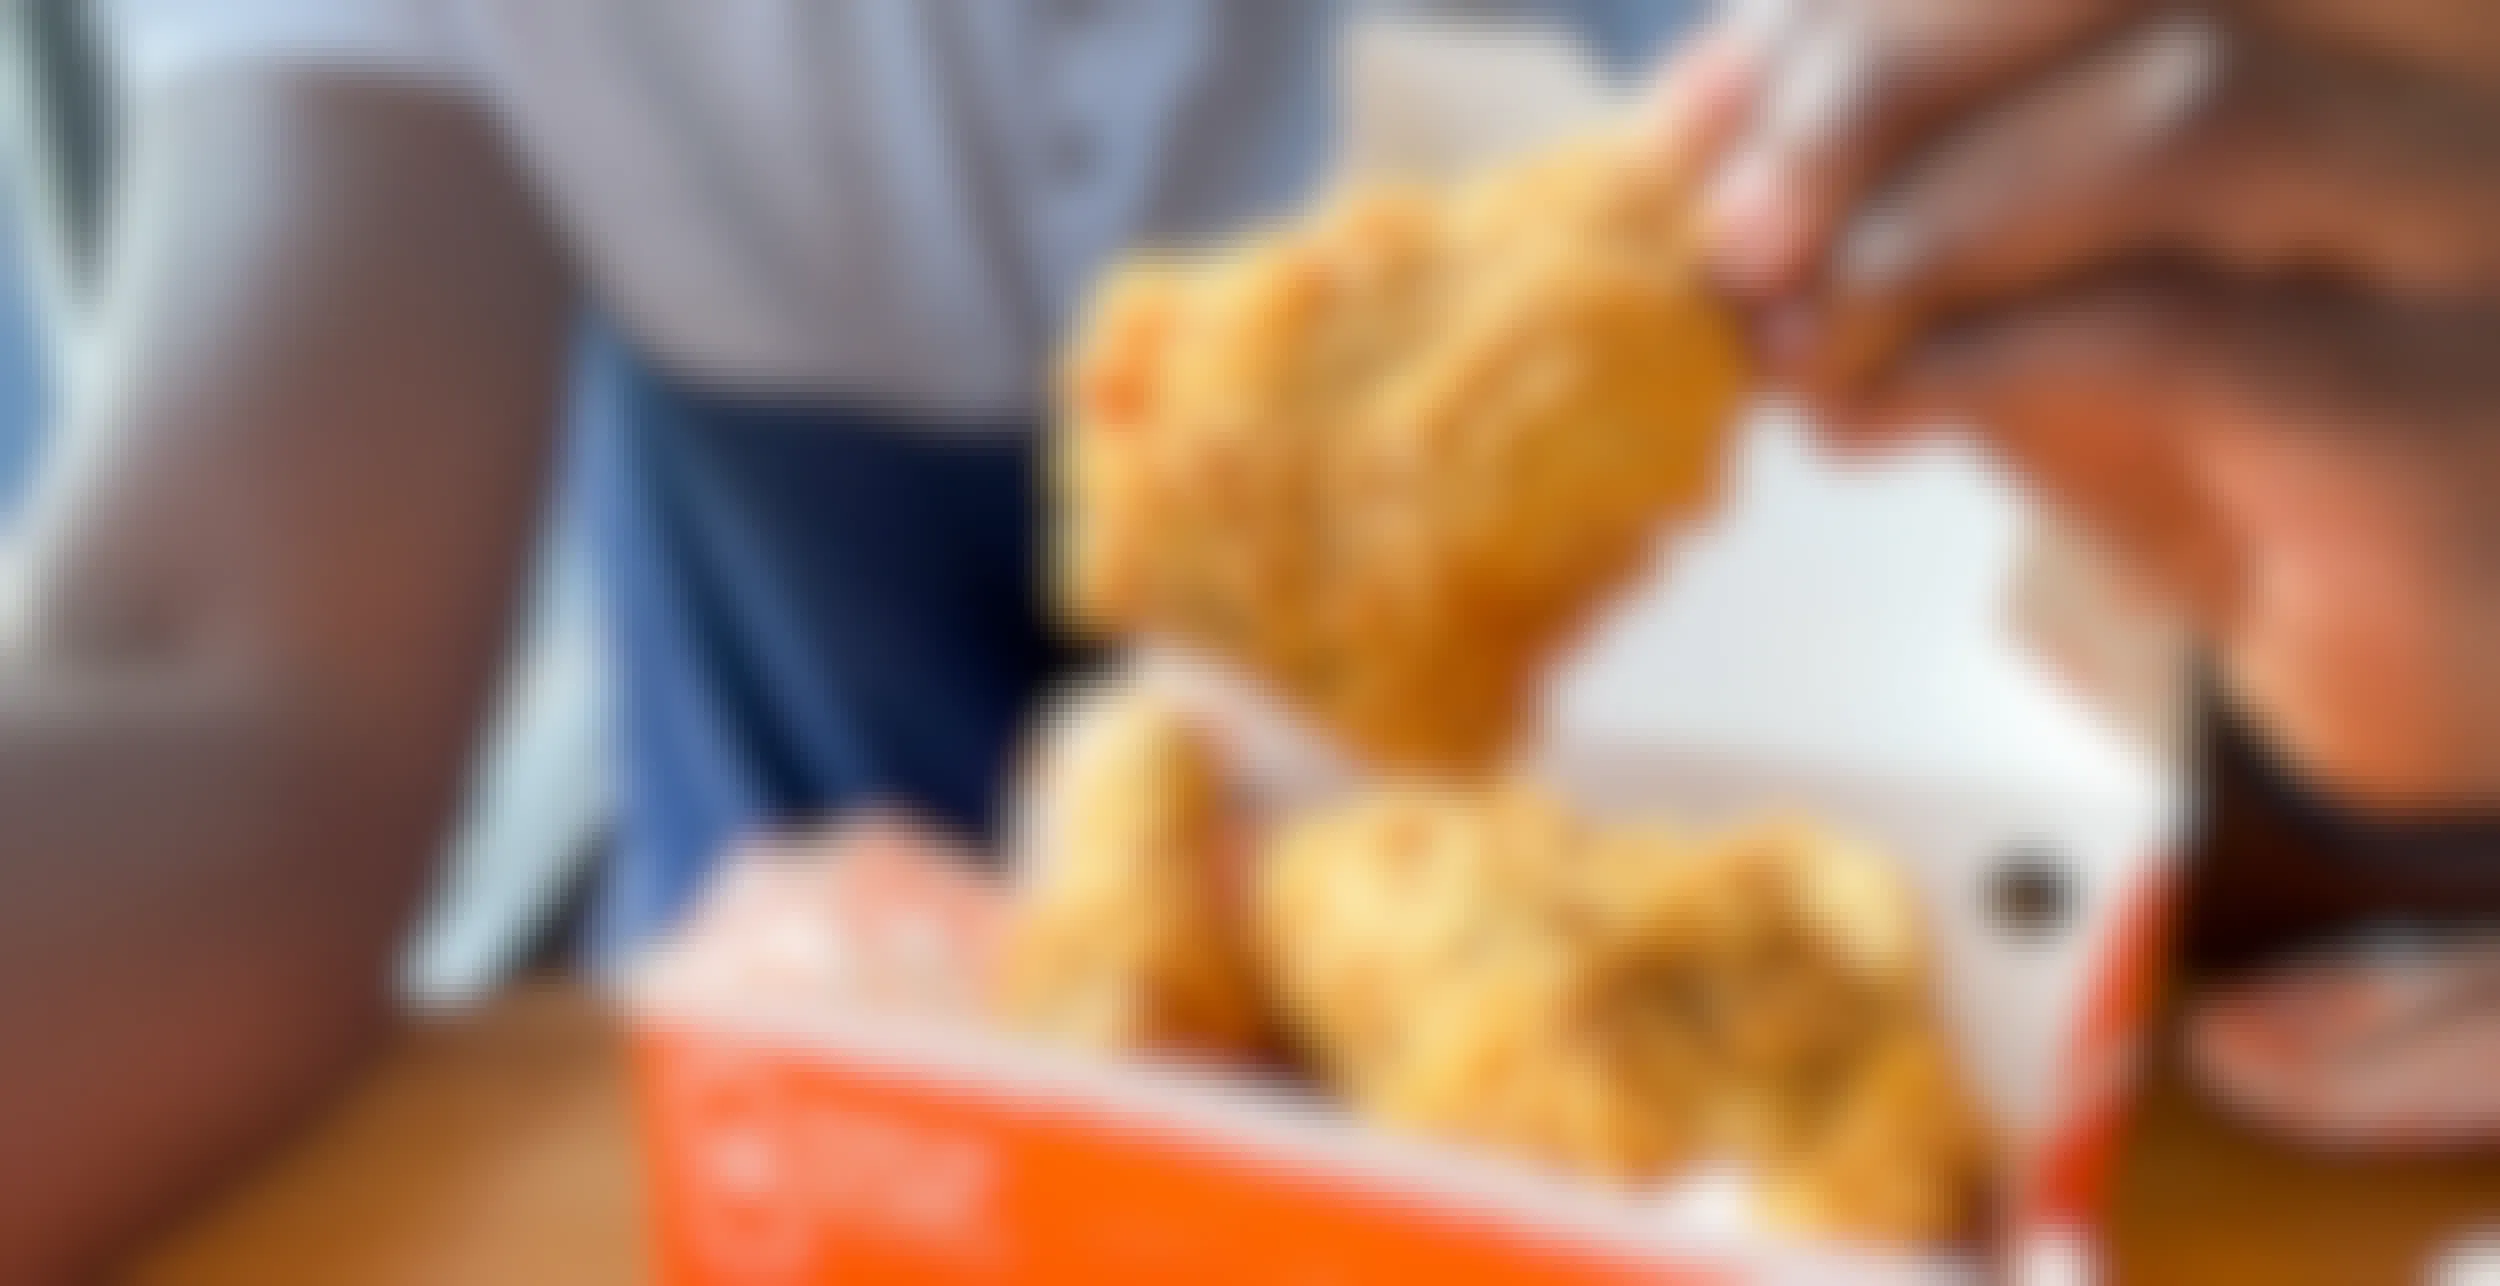 Proven DoorDash Promo Codes You Can Use: 25% Off Popeyes Wings